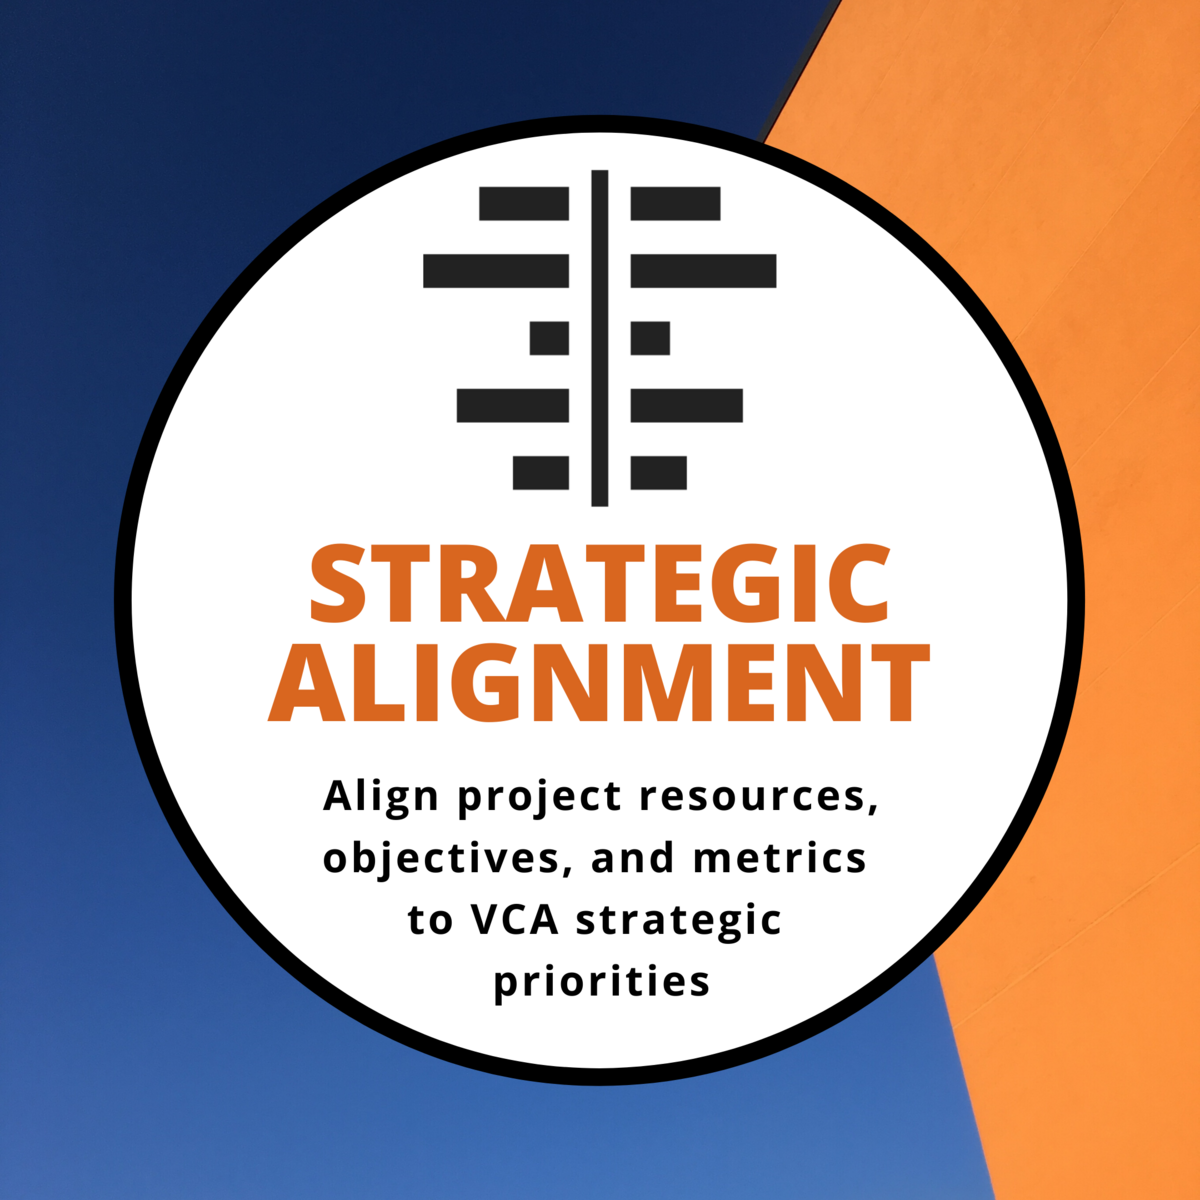 Strategic Alignment: Align project resources, objectives, and metrics to VCA strategic priorities